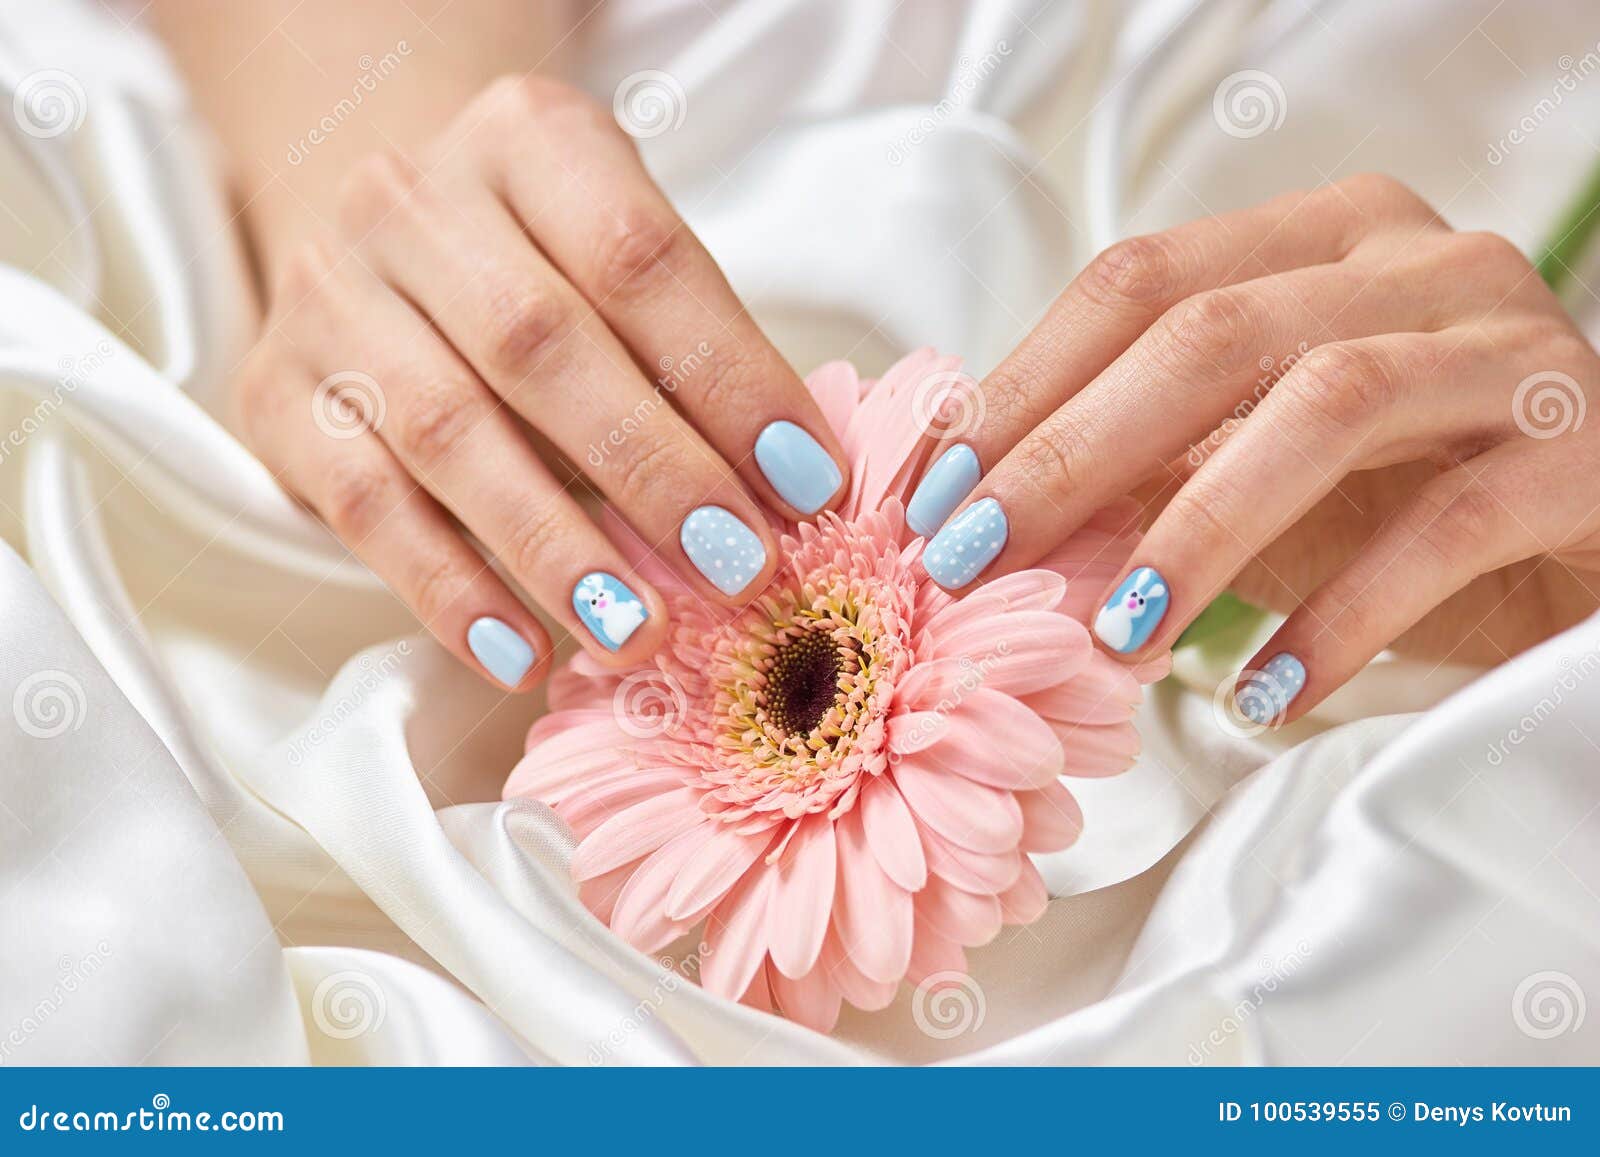 Female Manicured Hands Holding Gerbera Stock Image Image Of Material